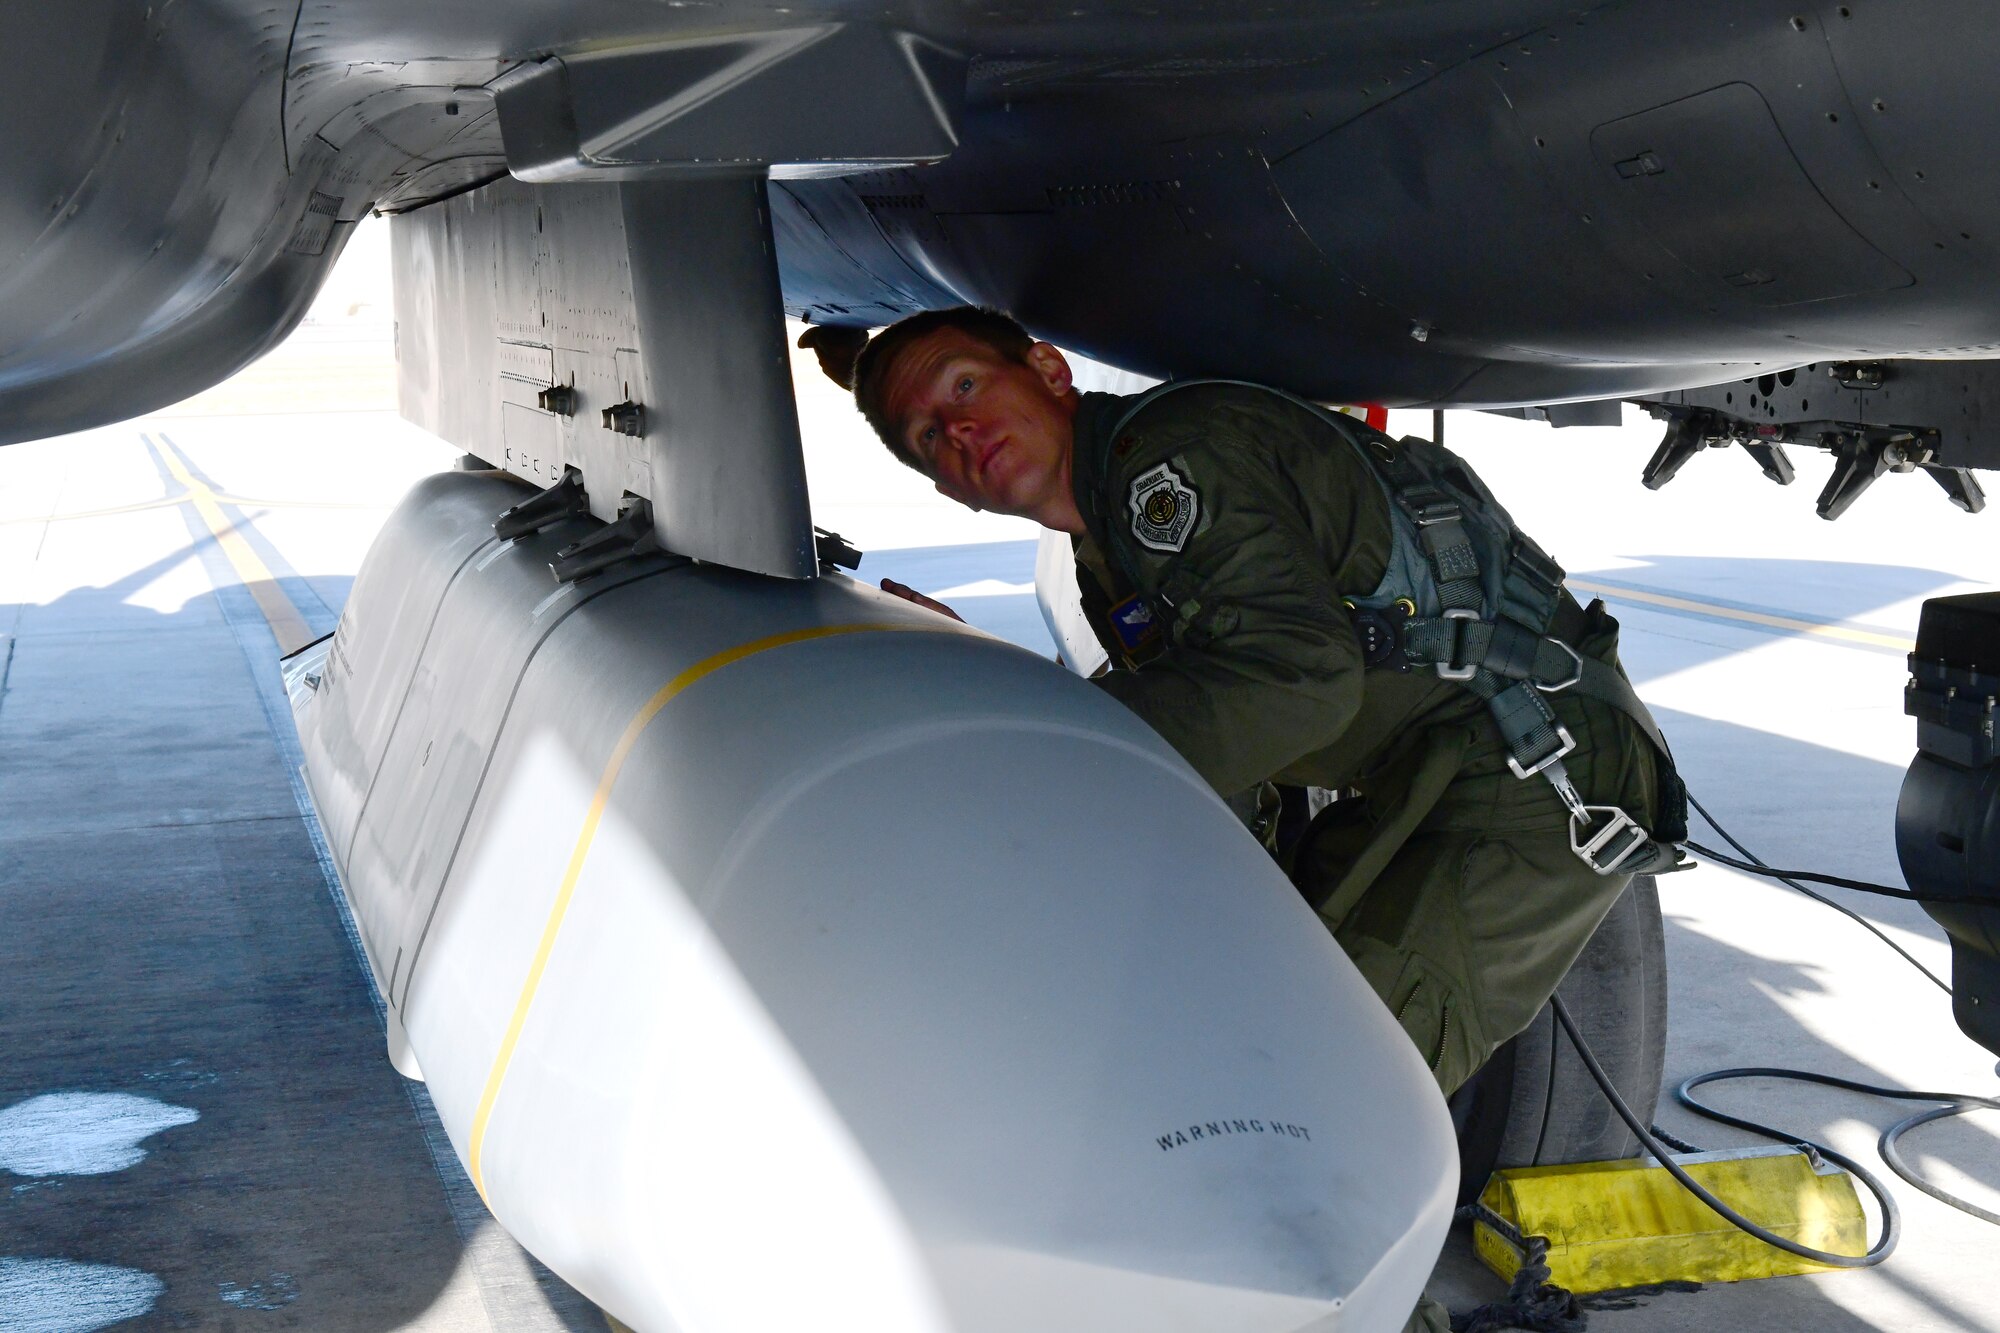 Maj. Ryan Mobley, 706th Fighter Squadron assistant director of operations and F-15E test director, prepares to conduct an AGM-158B Joint Air-to-Surface Standoff Missile drop from an F-15E, Jan. 7, Nellis Air Force Base, Nev. While the F-15E is the leading delivery platform for JASSM in the Area of Responsibility, the missile release at White Sands Missile Range, New Mexico, was the first JASSM dropped by any unit from Nellis AFB.